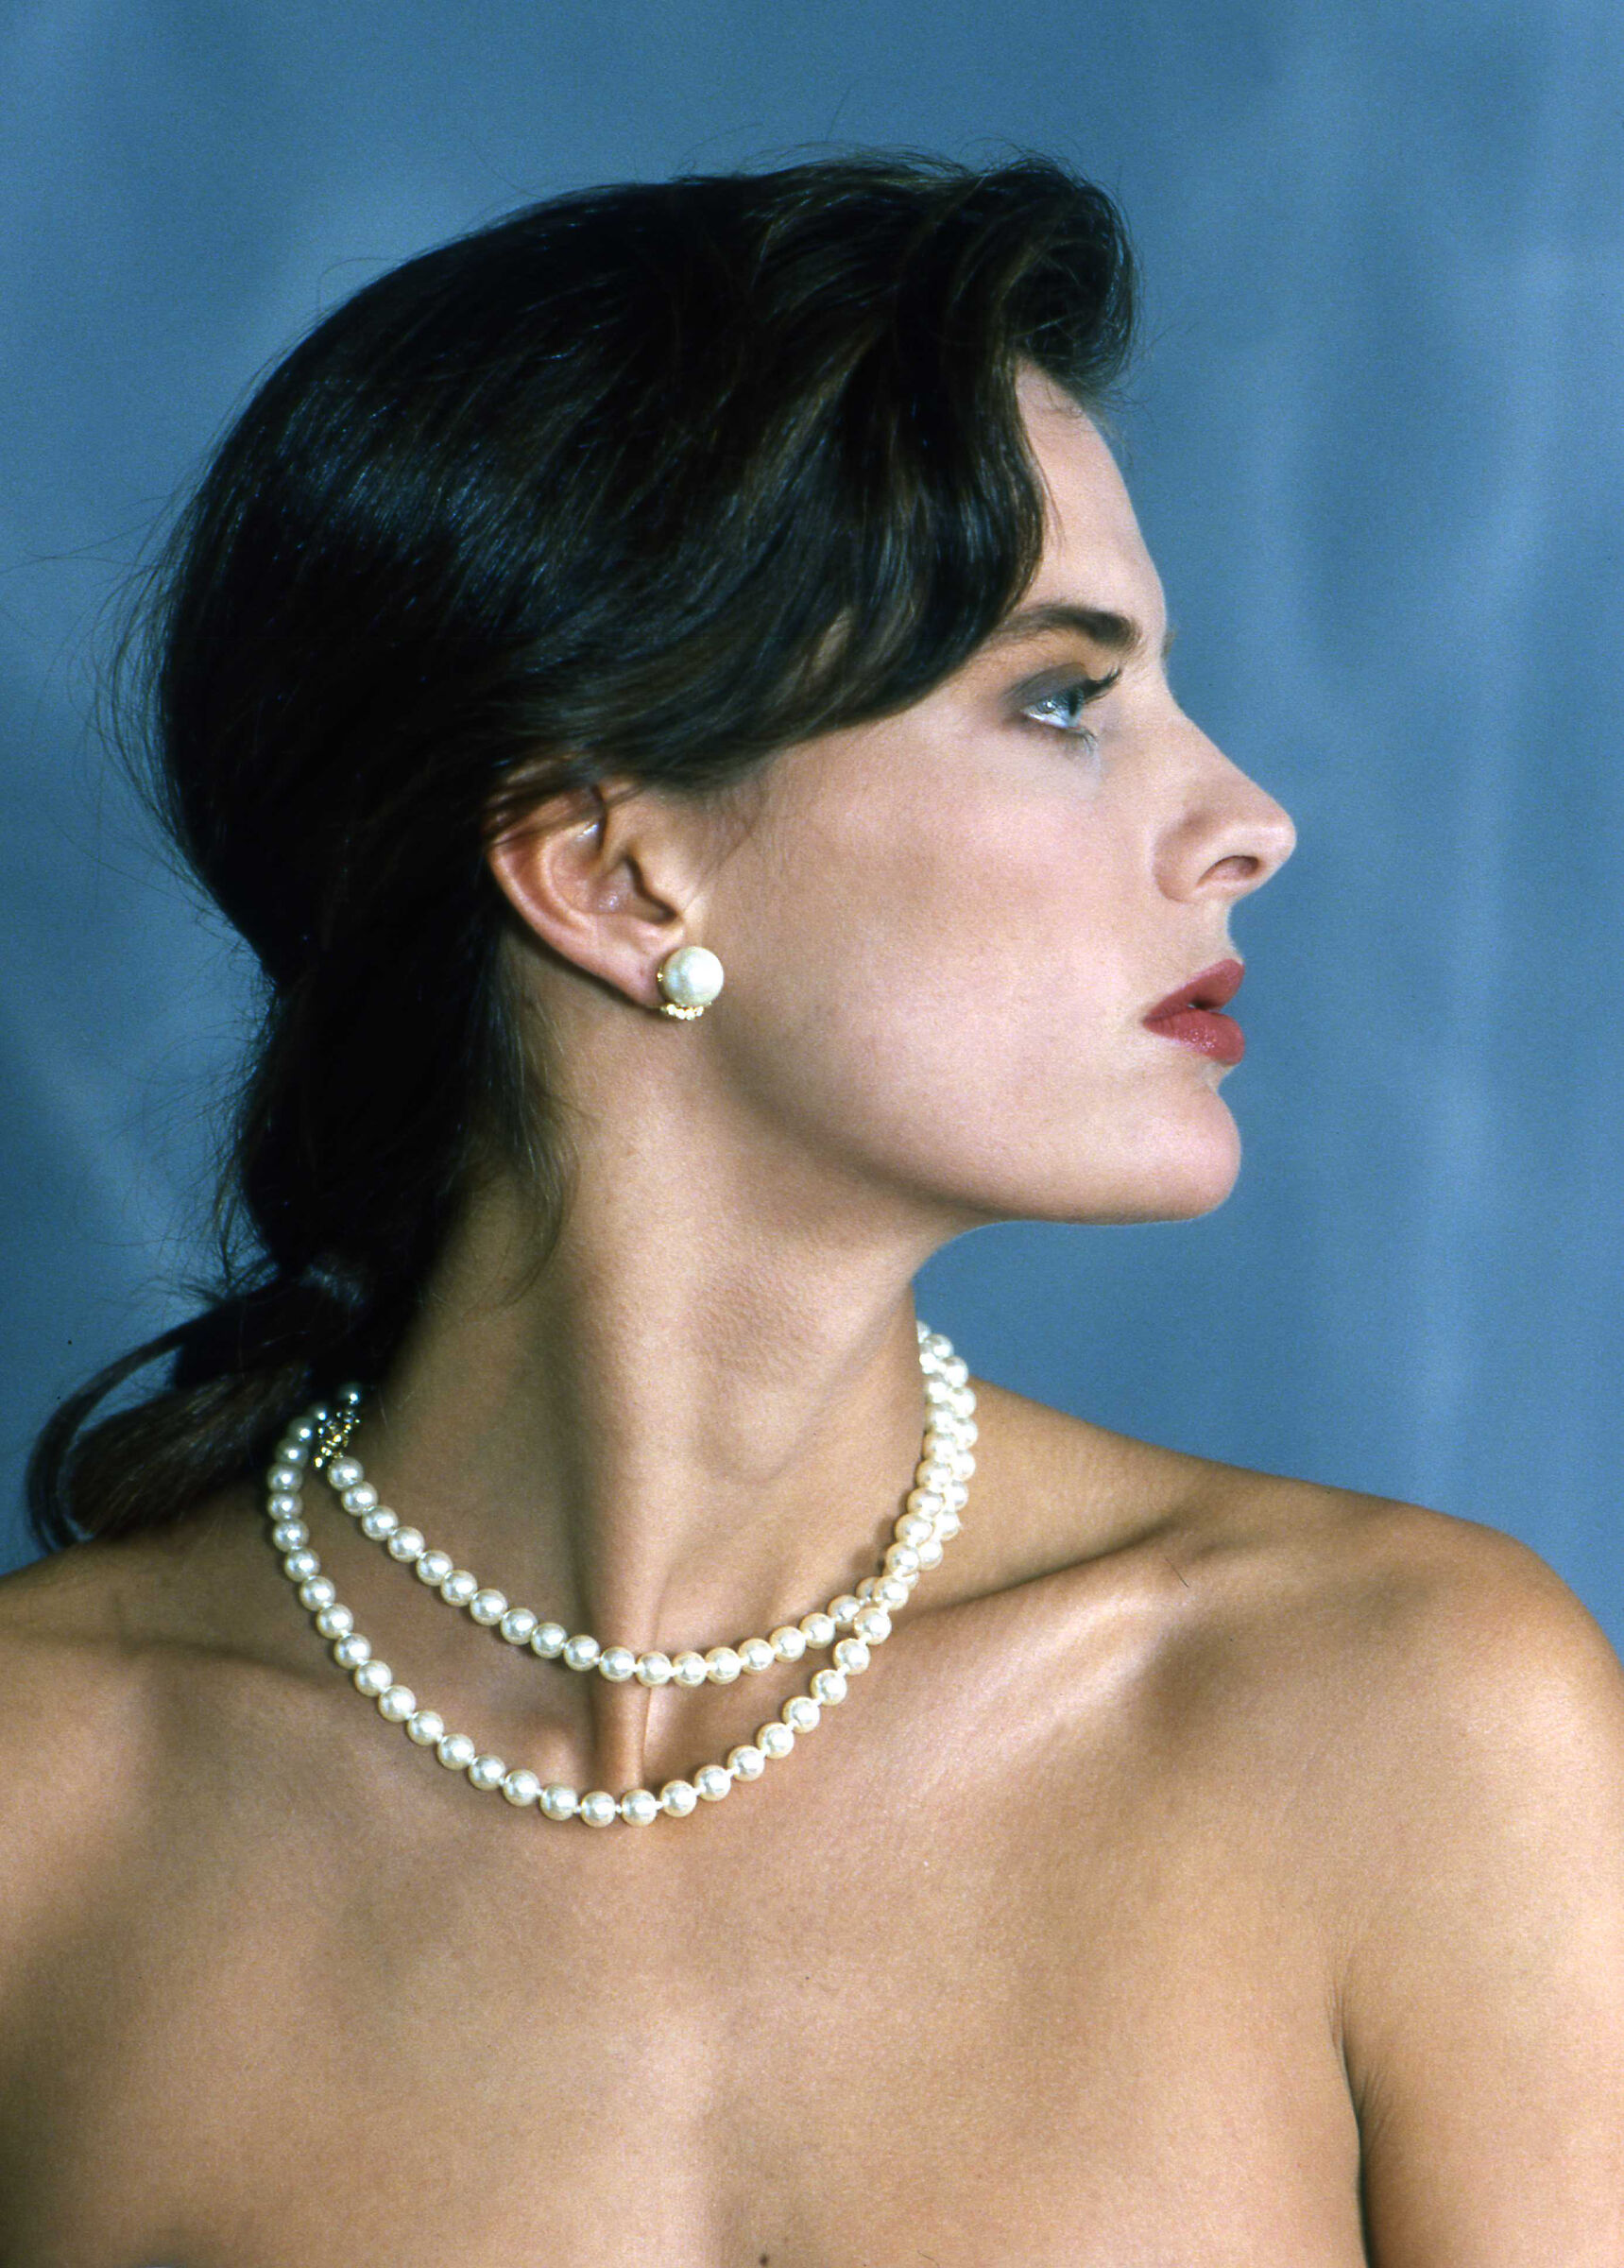 profile with pearls...